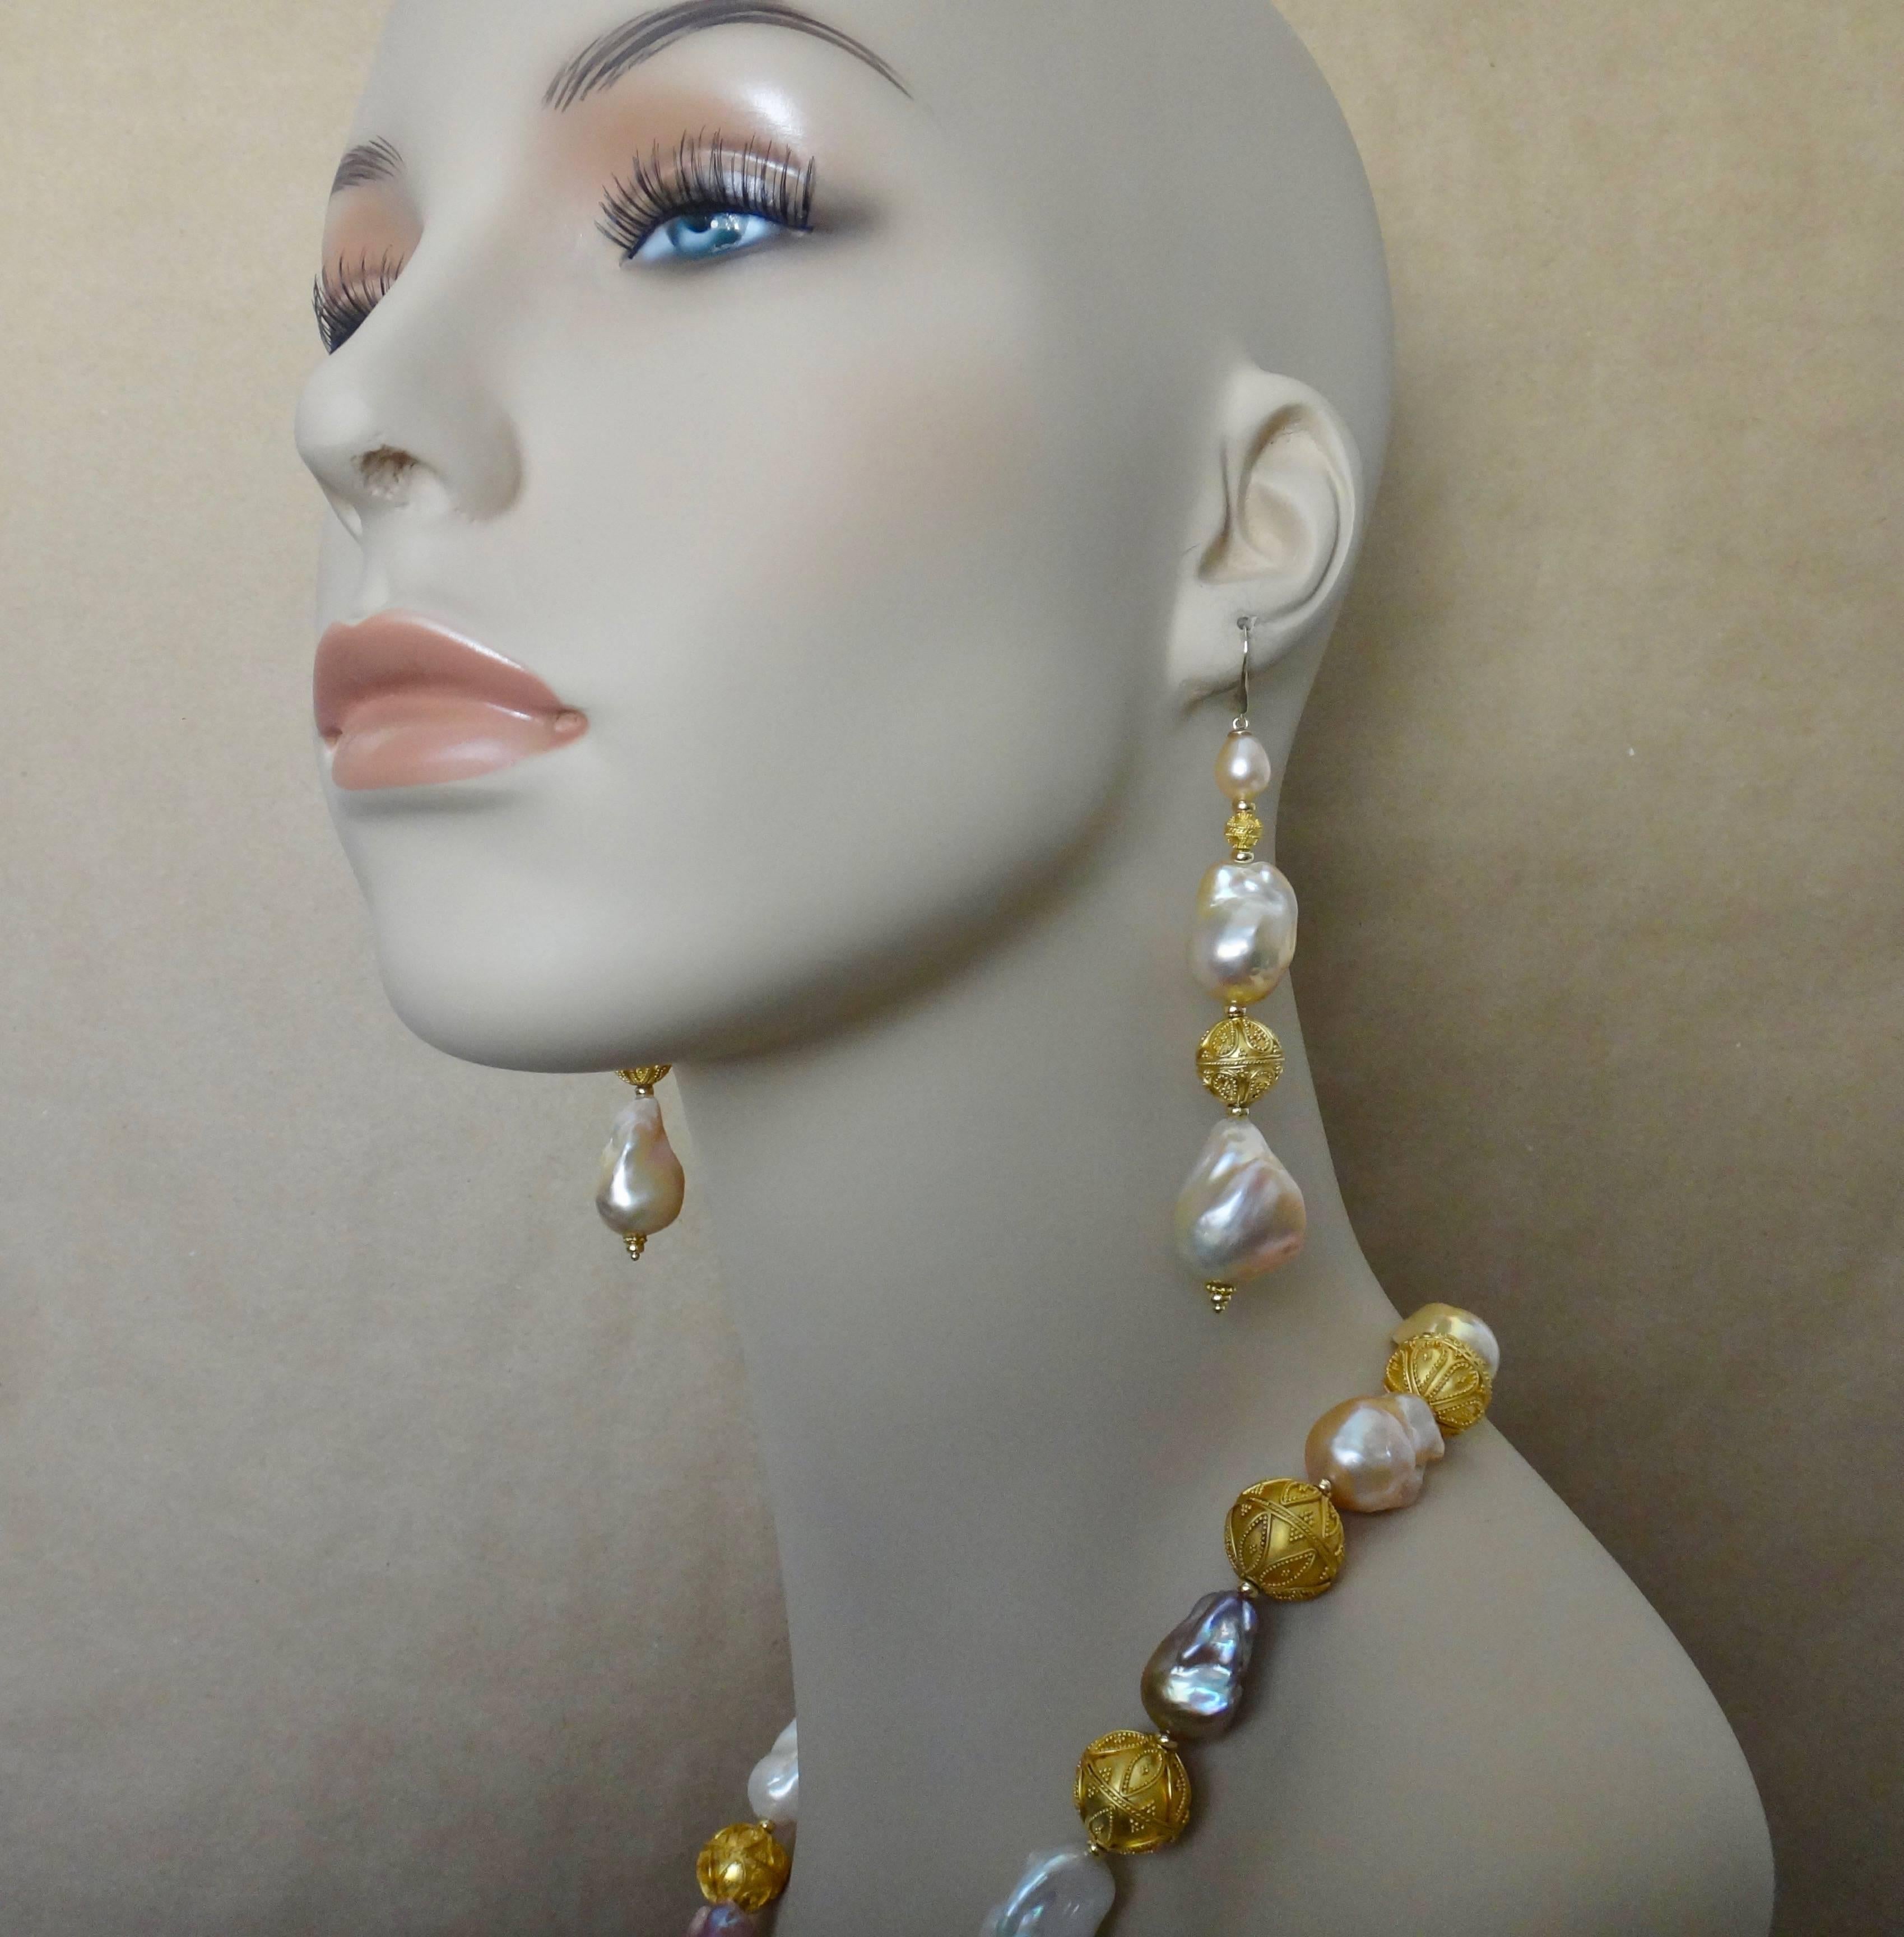 Generously sized cloud pearls are complimented by granulated beads in this bold suite.  The pearls possess rich colors and great luster.  The beads are granulated.  Granulation is an ancient process of jewelry decoration dating back to the